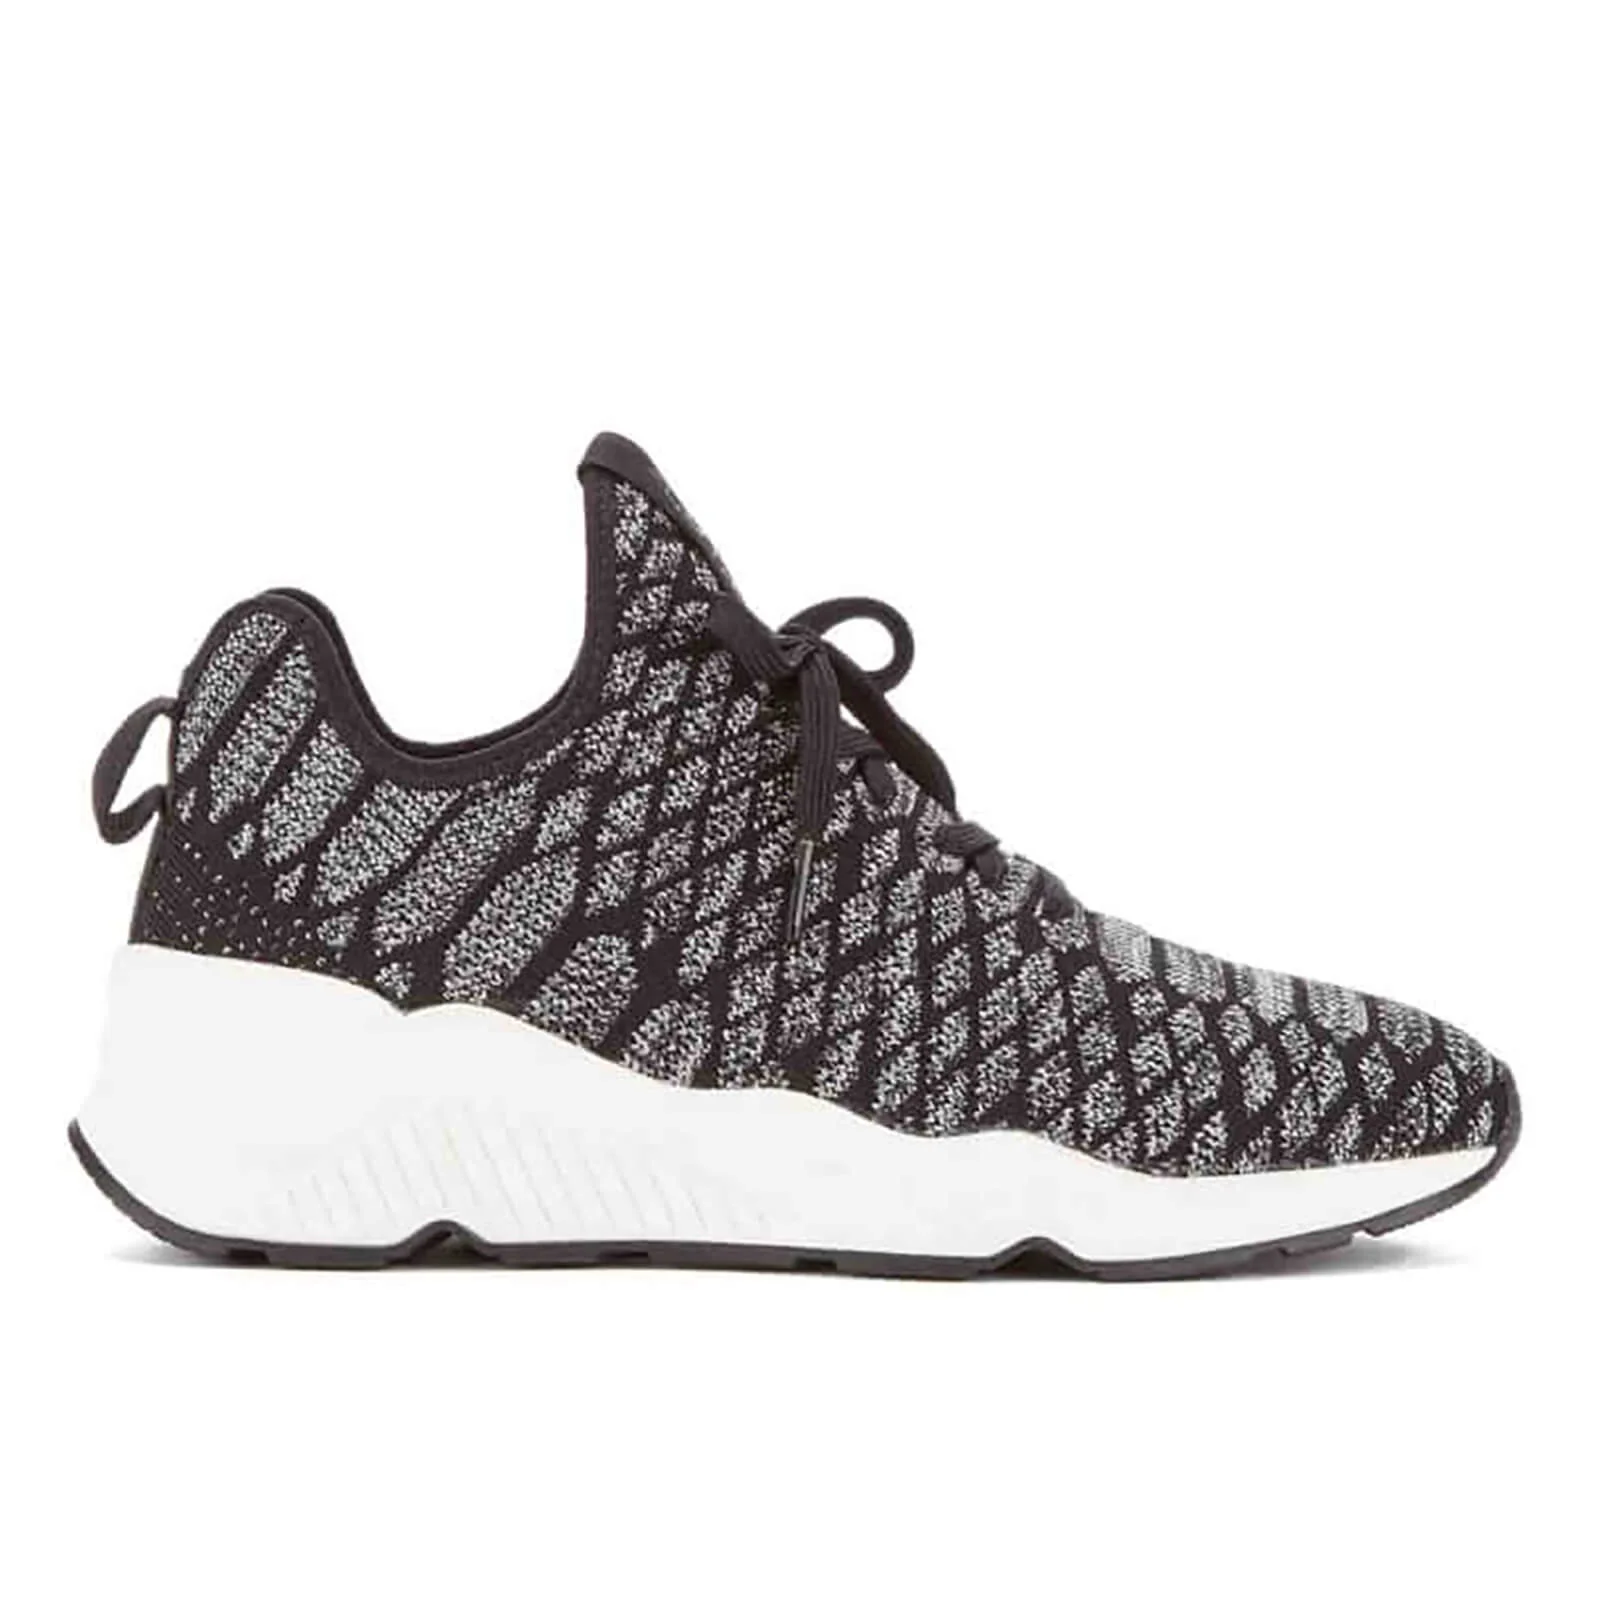 Ash Women's Magma Snake Print Knitted Running Trainers - Black/Grey Image 1